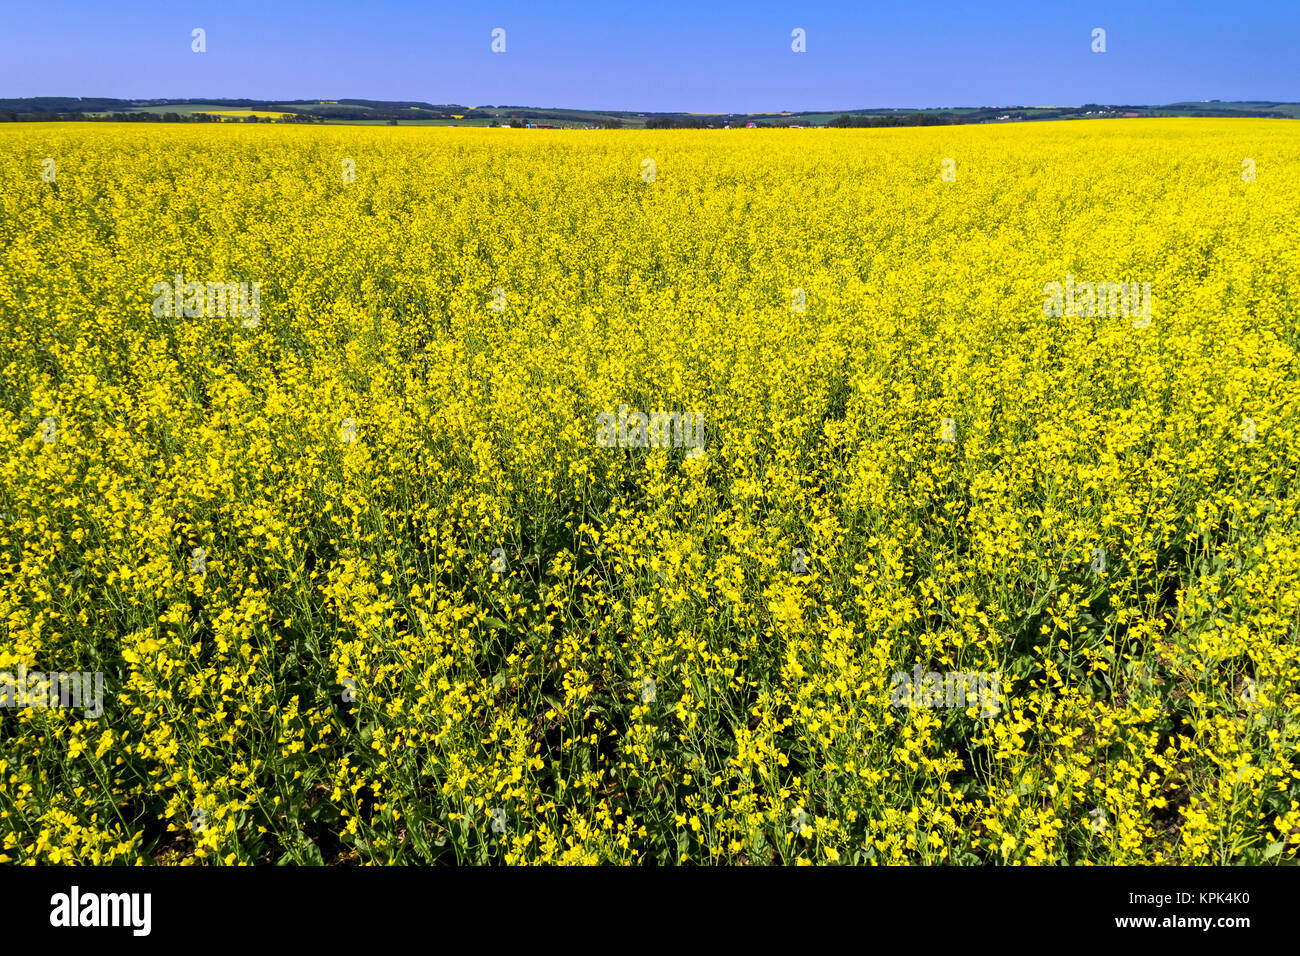 Flowering canola field with rolling hills and blue sky in the background, North of Sylvan Lake; Alberta, Canada Stock Photo